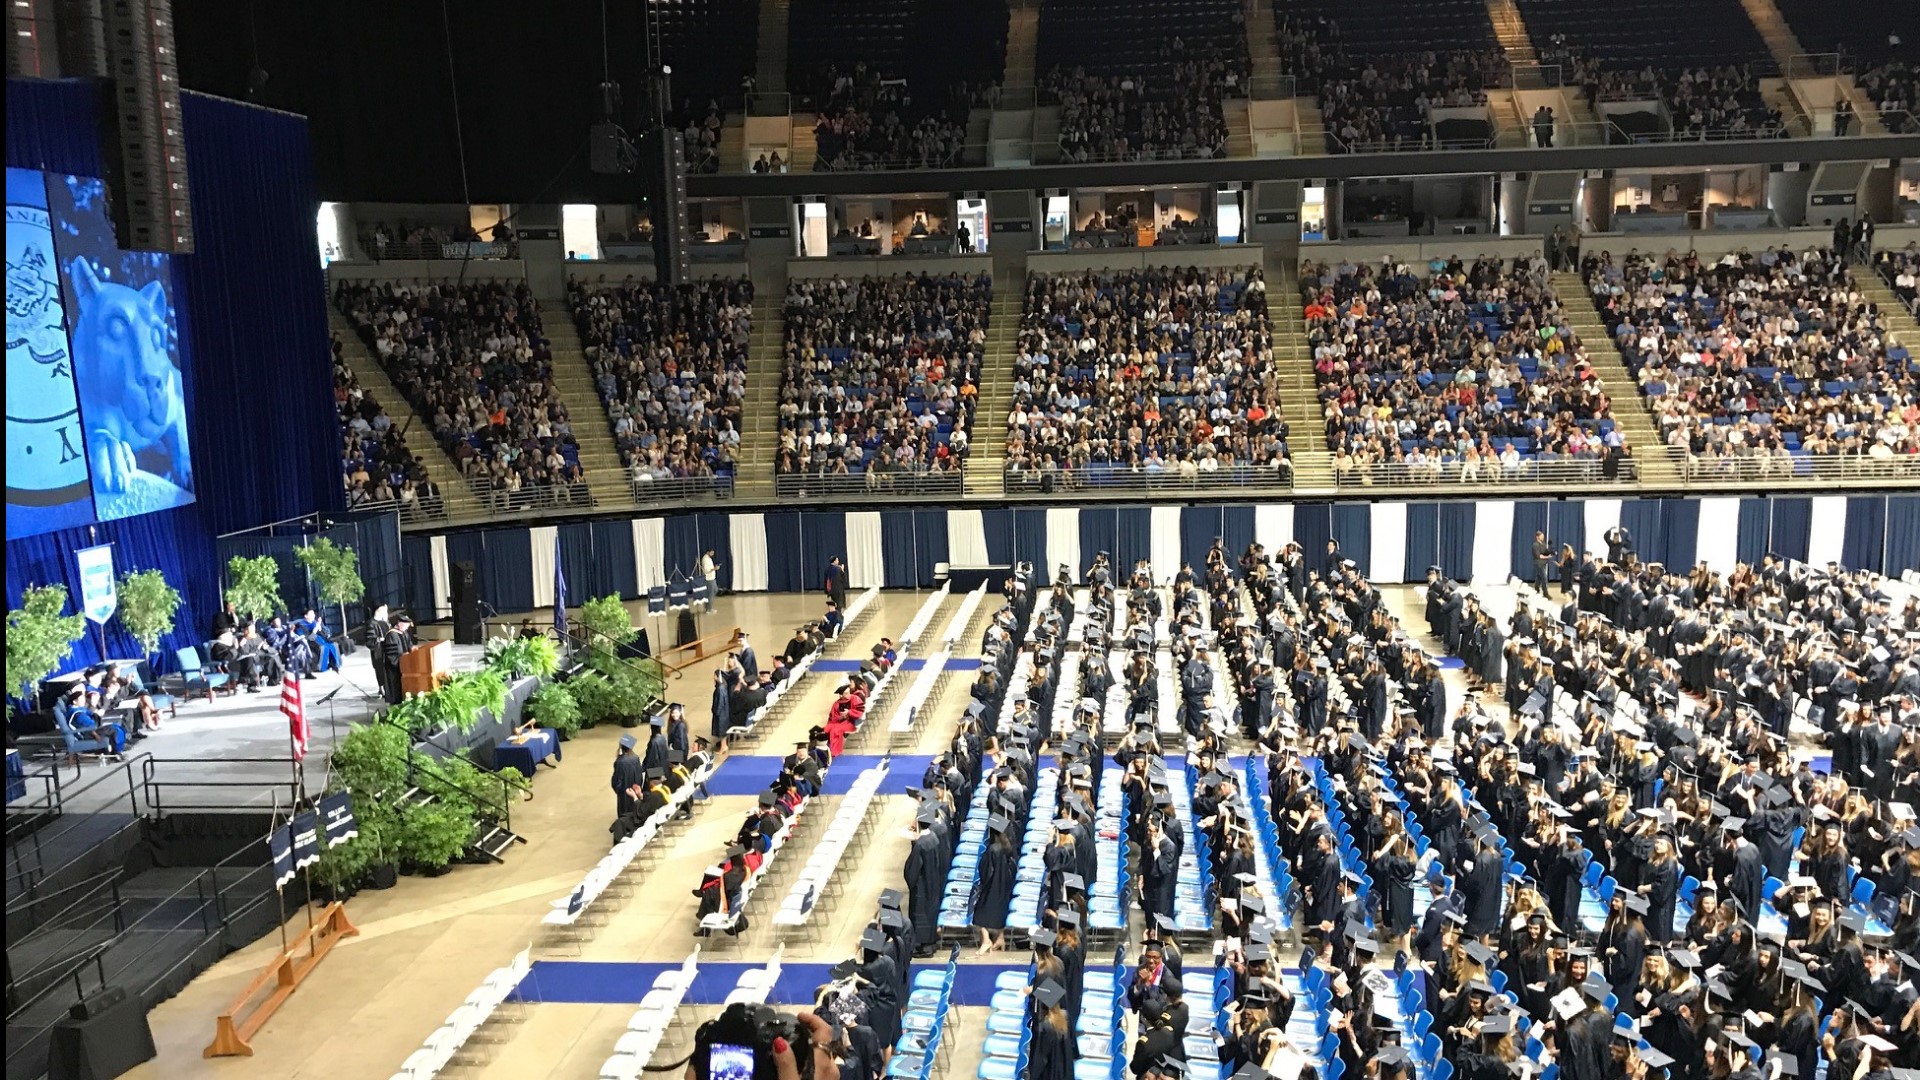 PSU seniors thrilled to have inperson graduation ceremonies this May